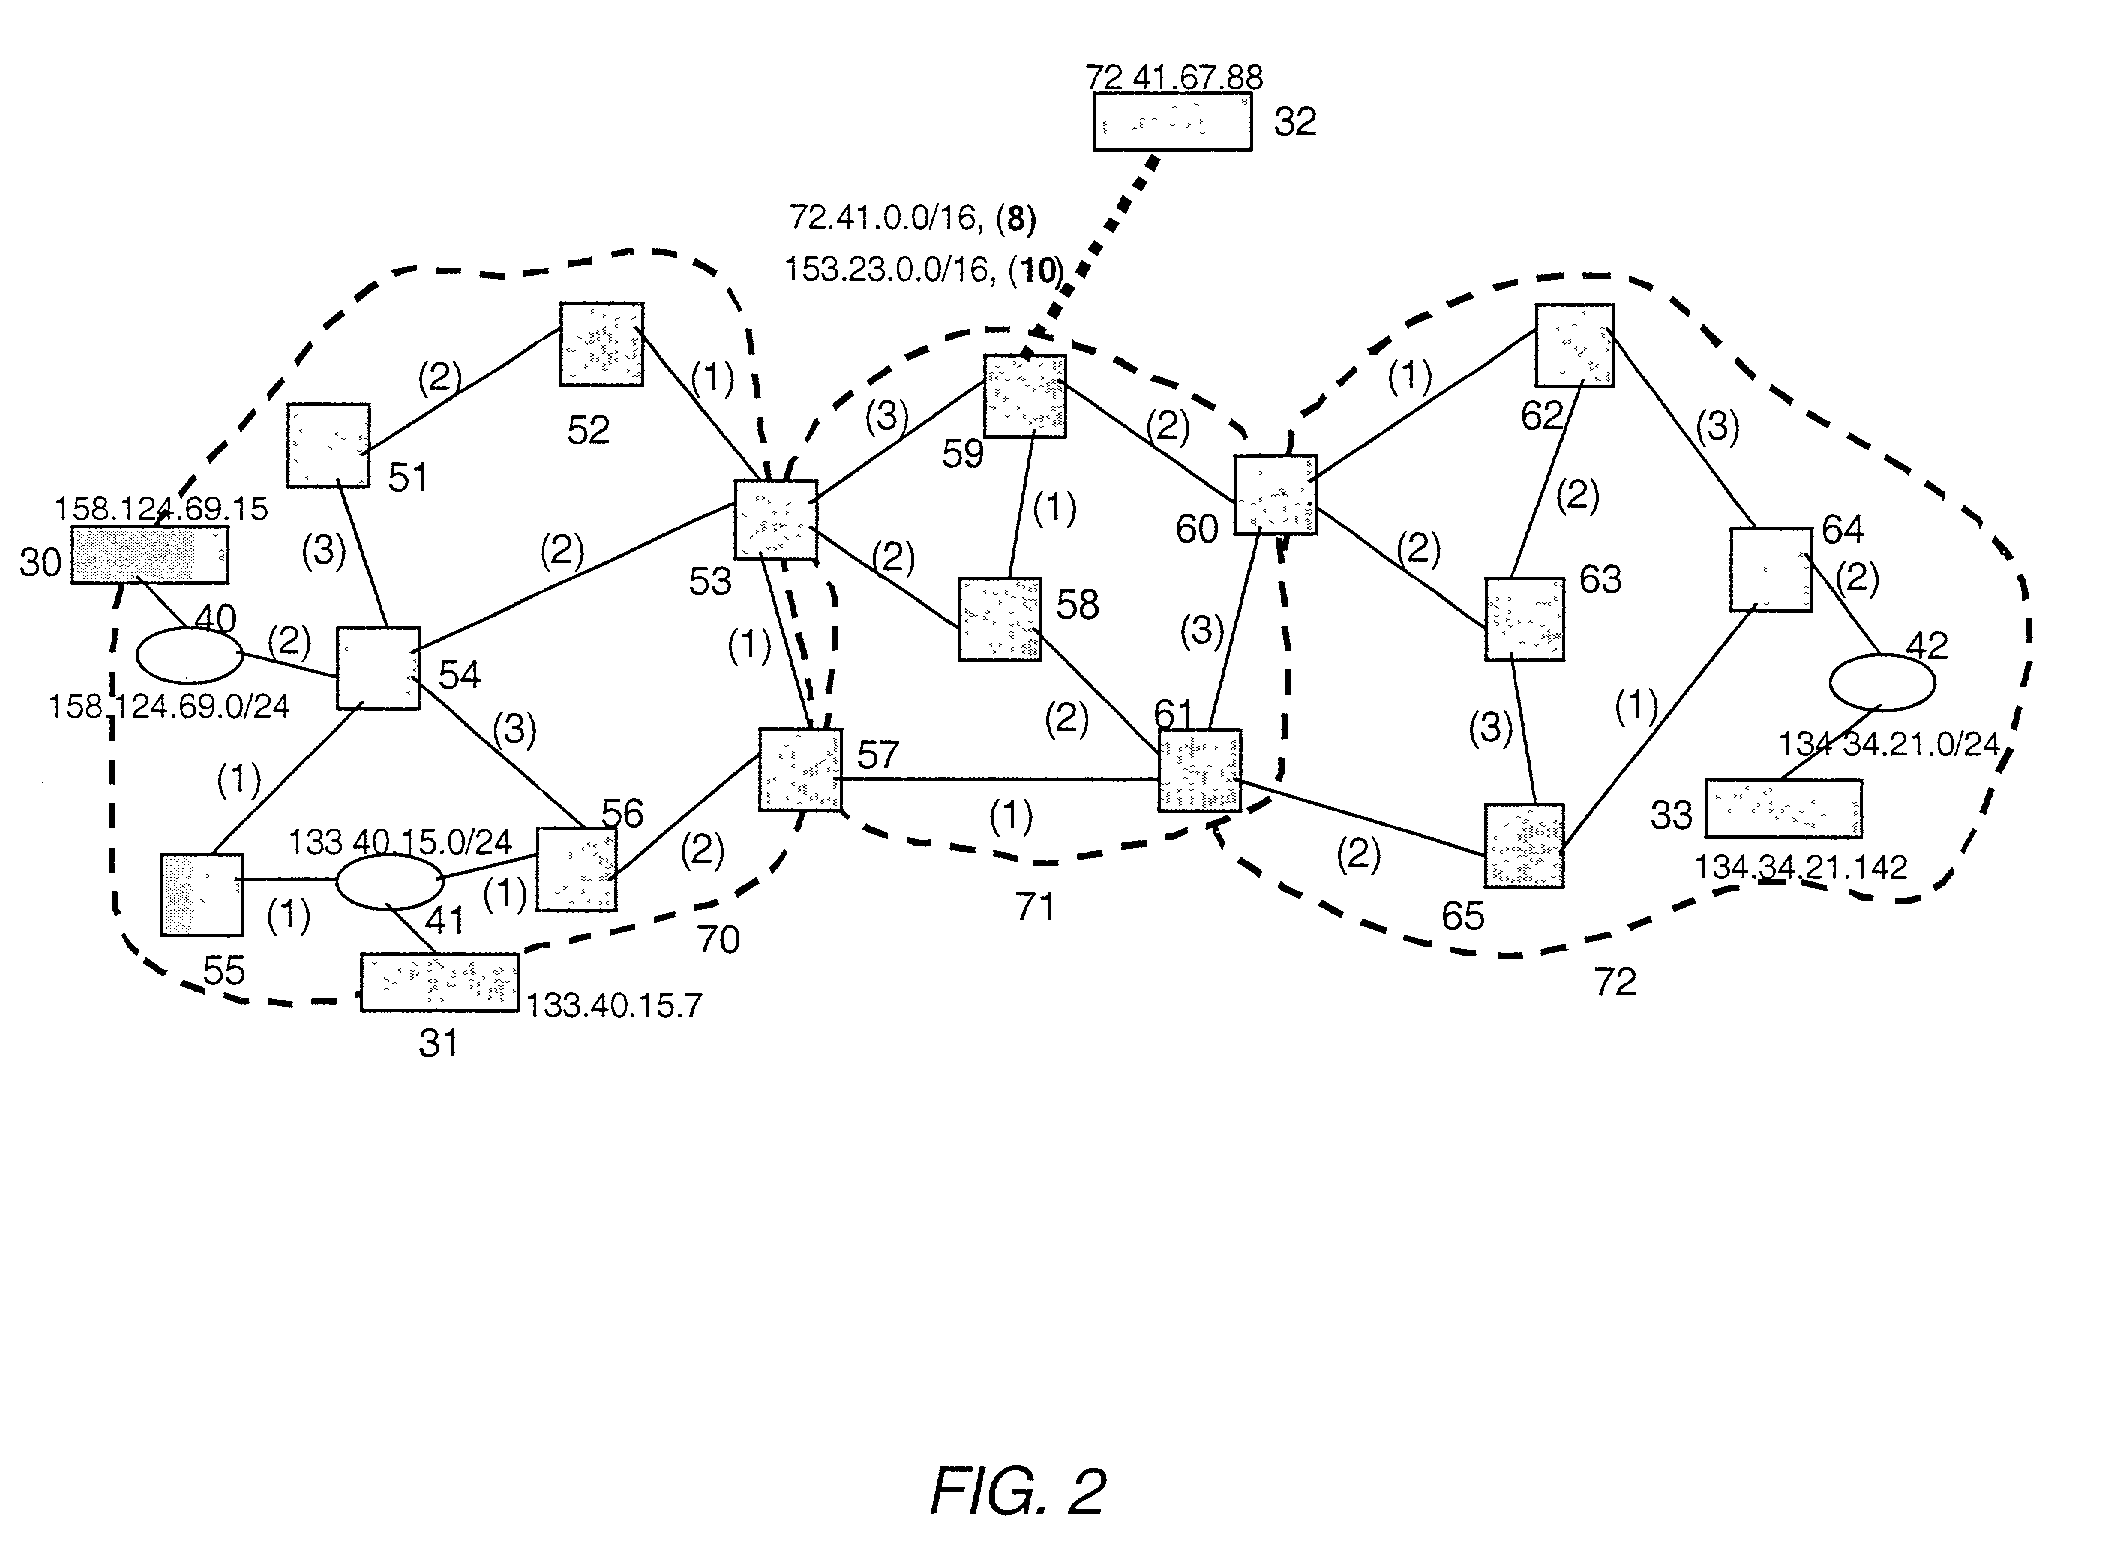 Method and system for topology construction and path identification in a two-level routing domain operated according to a simple link state routing protocol